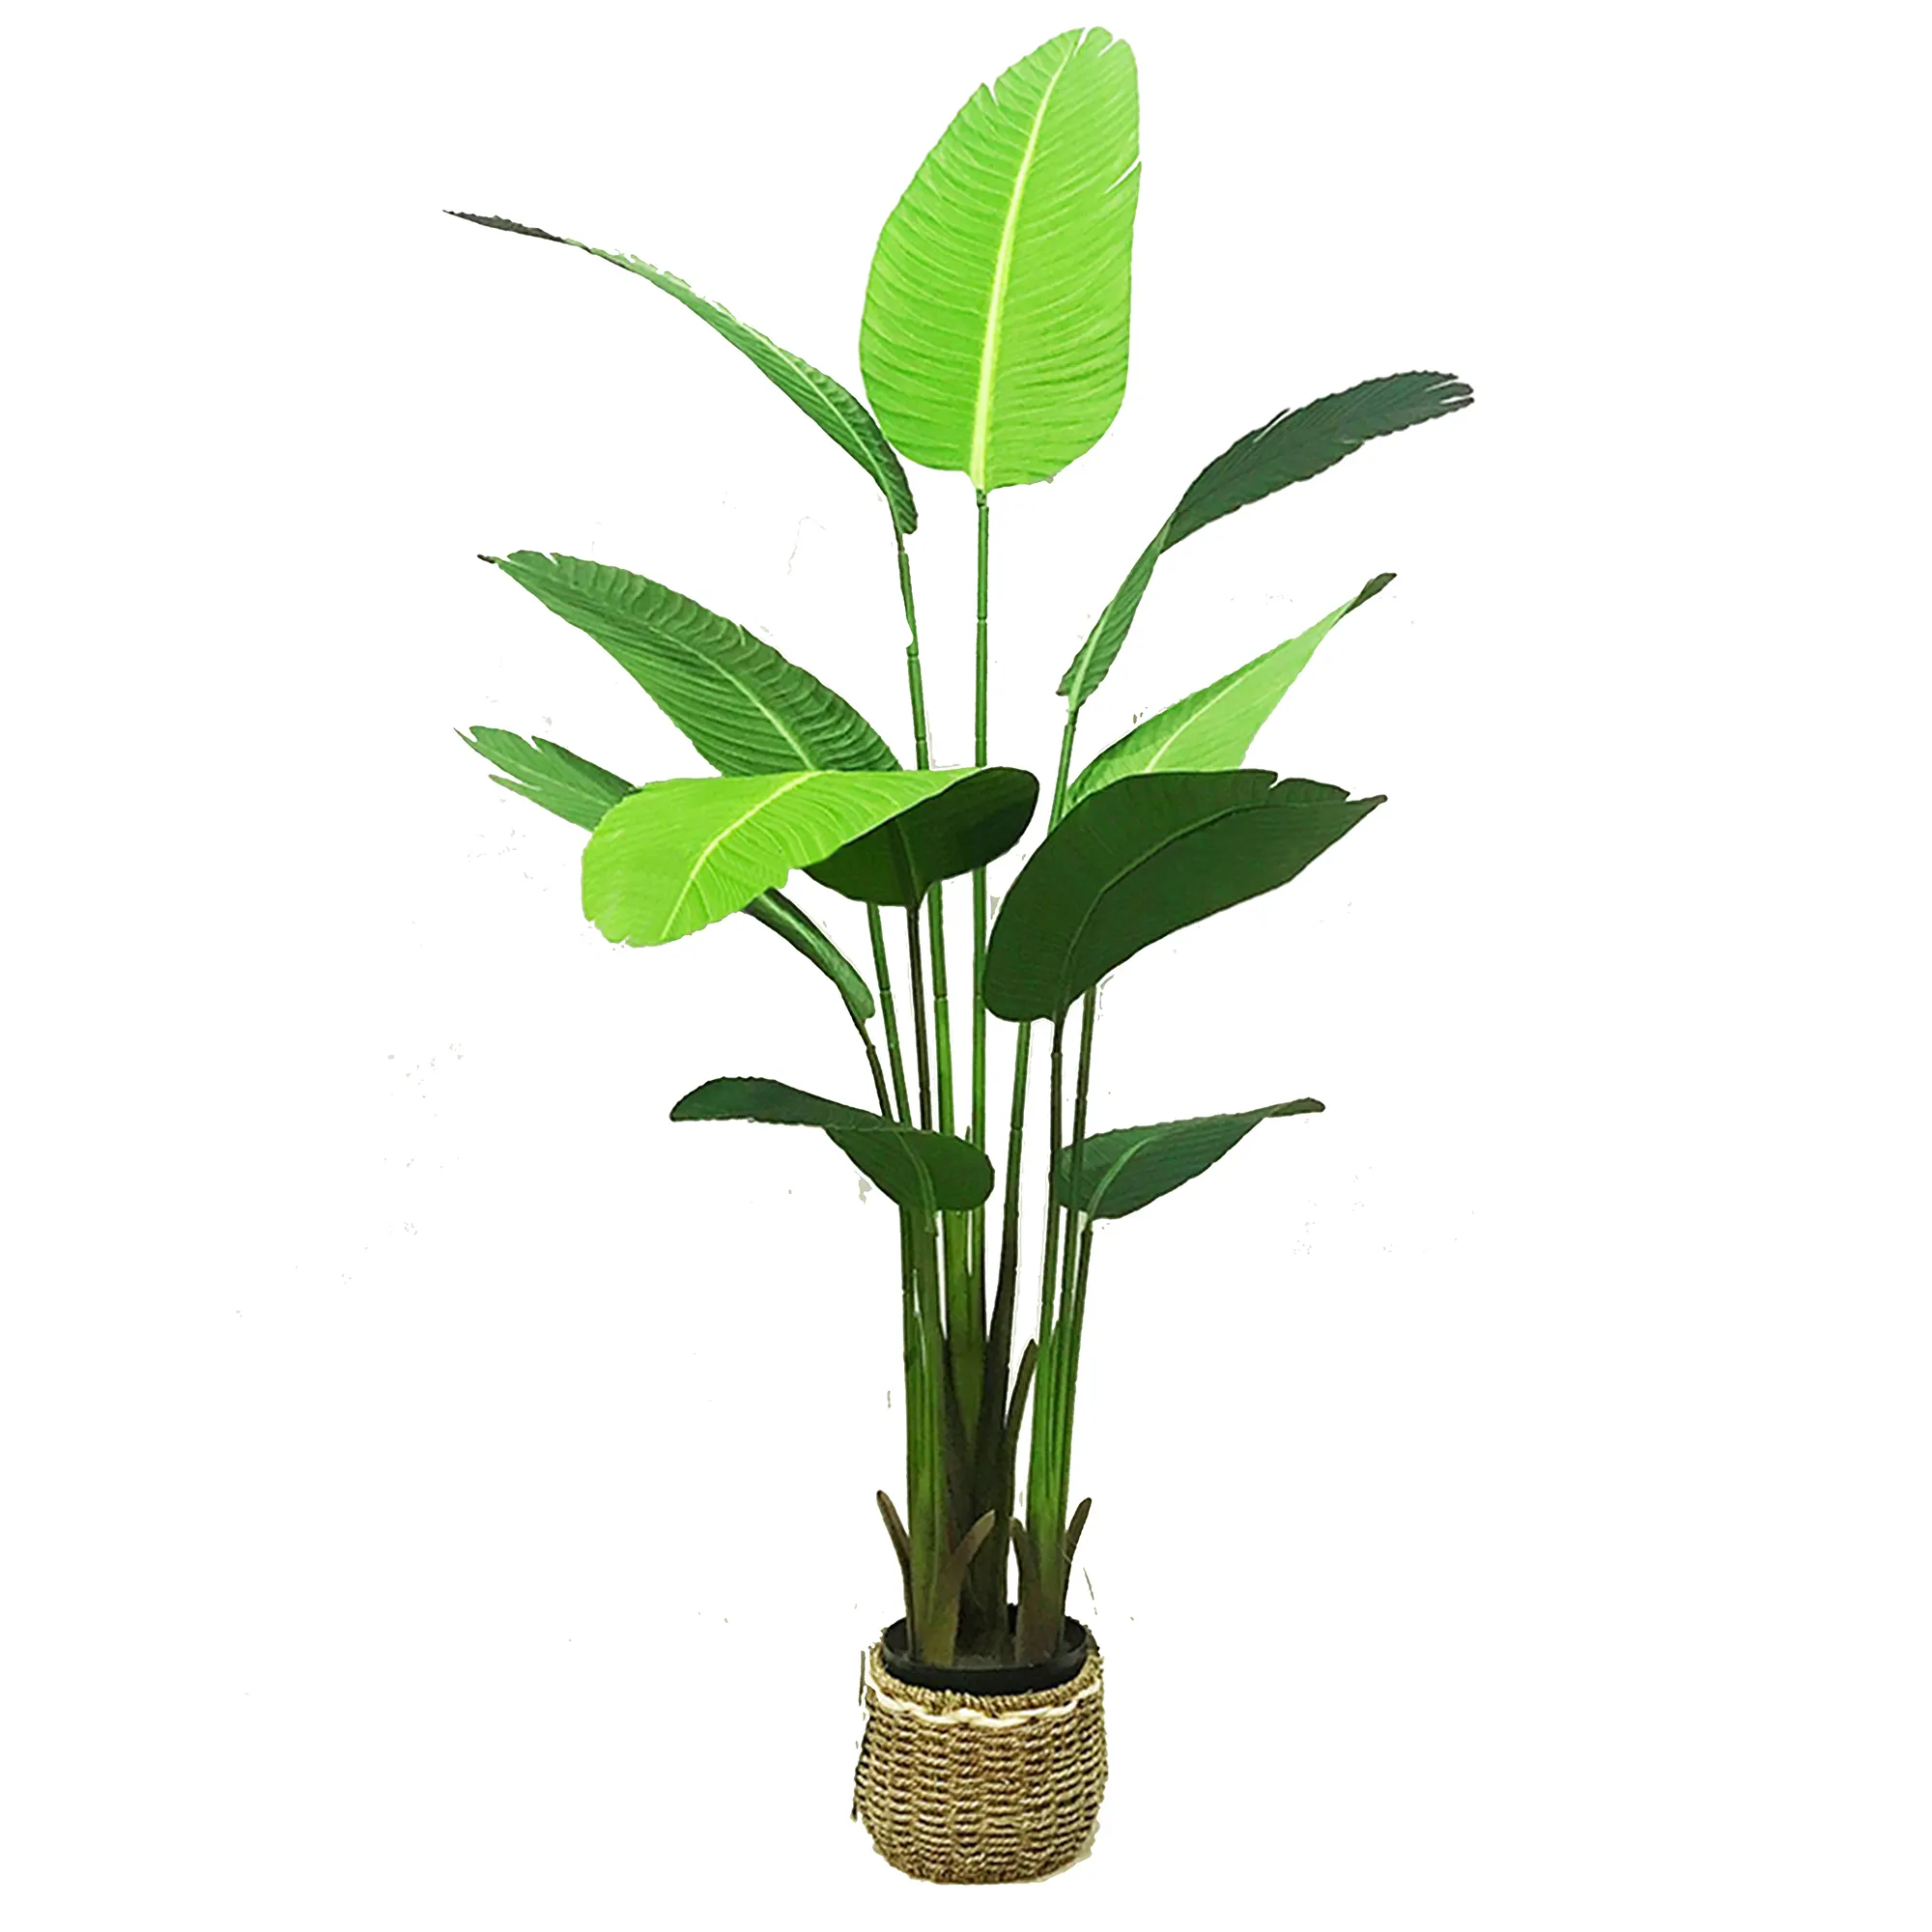 160cm 10 leaves Artificial Tree Bird of Paradise Plant Tropical Palm Tree Potted Plant for Indoor Outdoor Decor